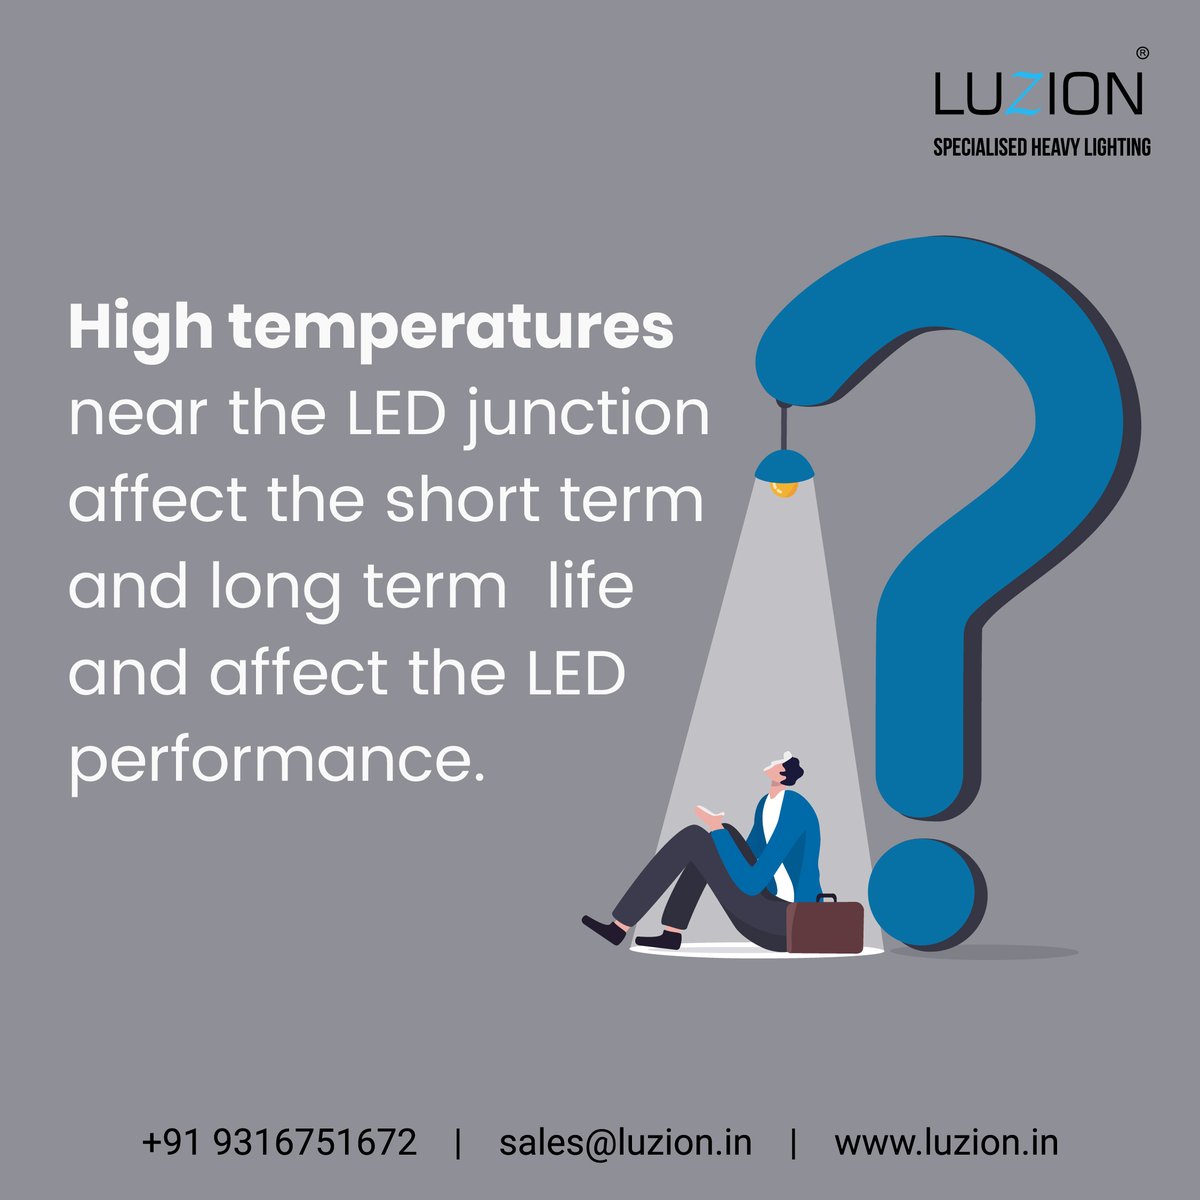 To improve the performance of the LED modules, LED junction temperature should be kept below 65 degree Celsius. 
🔻Certified by R&B CAT III, Military, Railway, ICF, GSECL, EESL
@ luzion.in  

#definition #technical #informative #LEDdrivers #LEDlights #lights